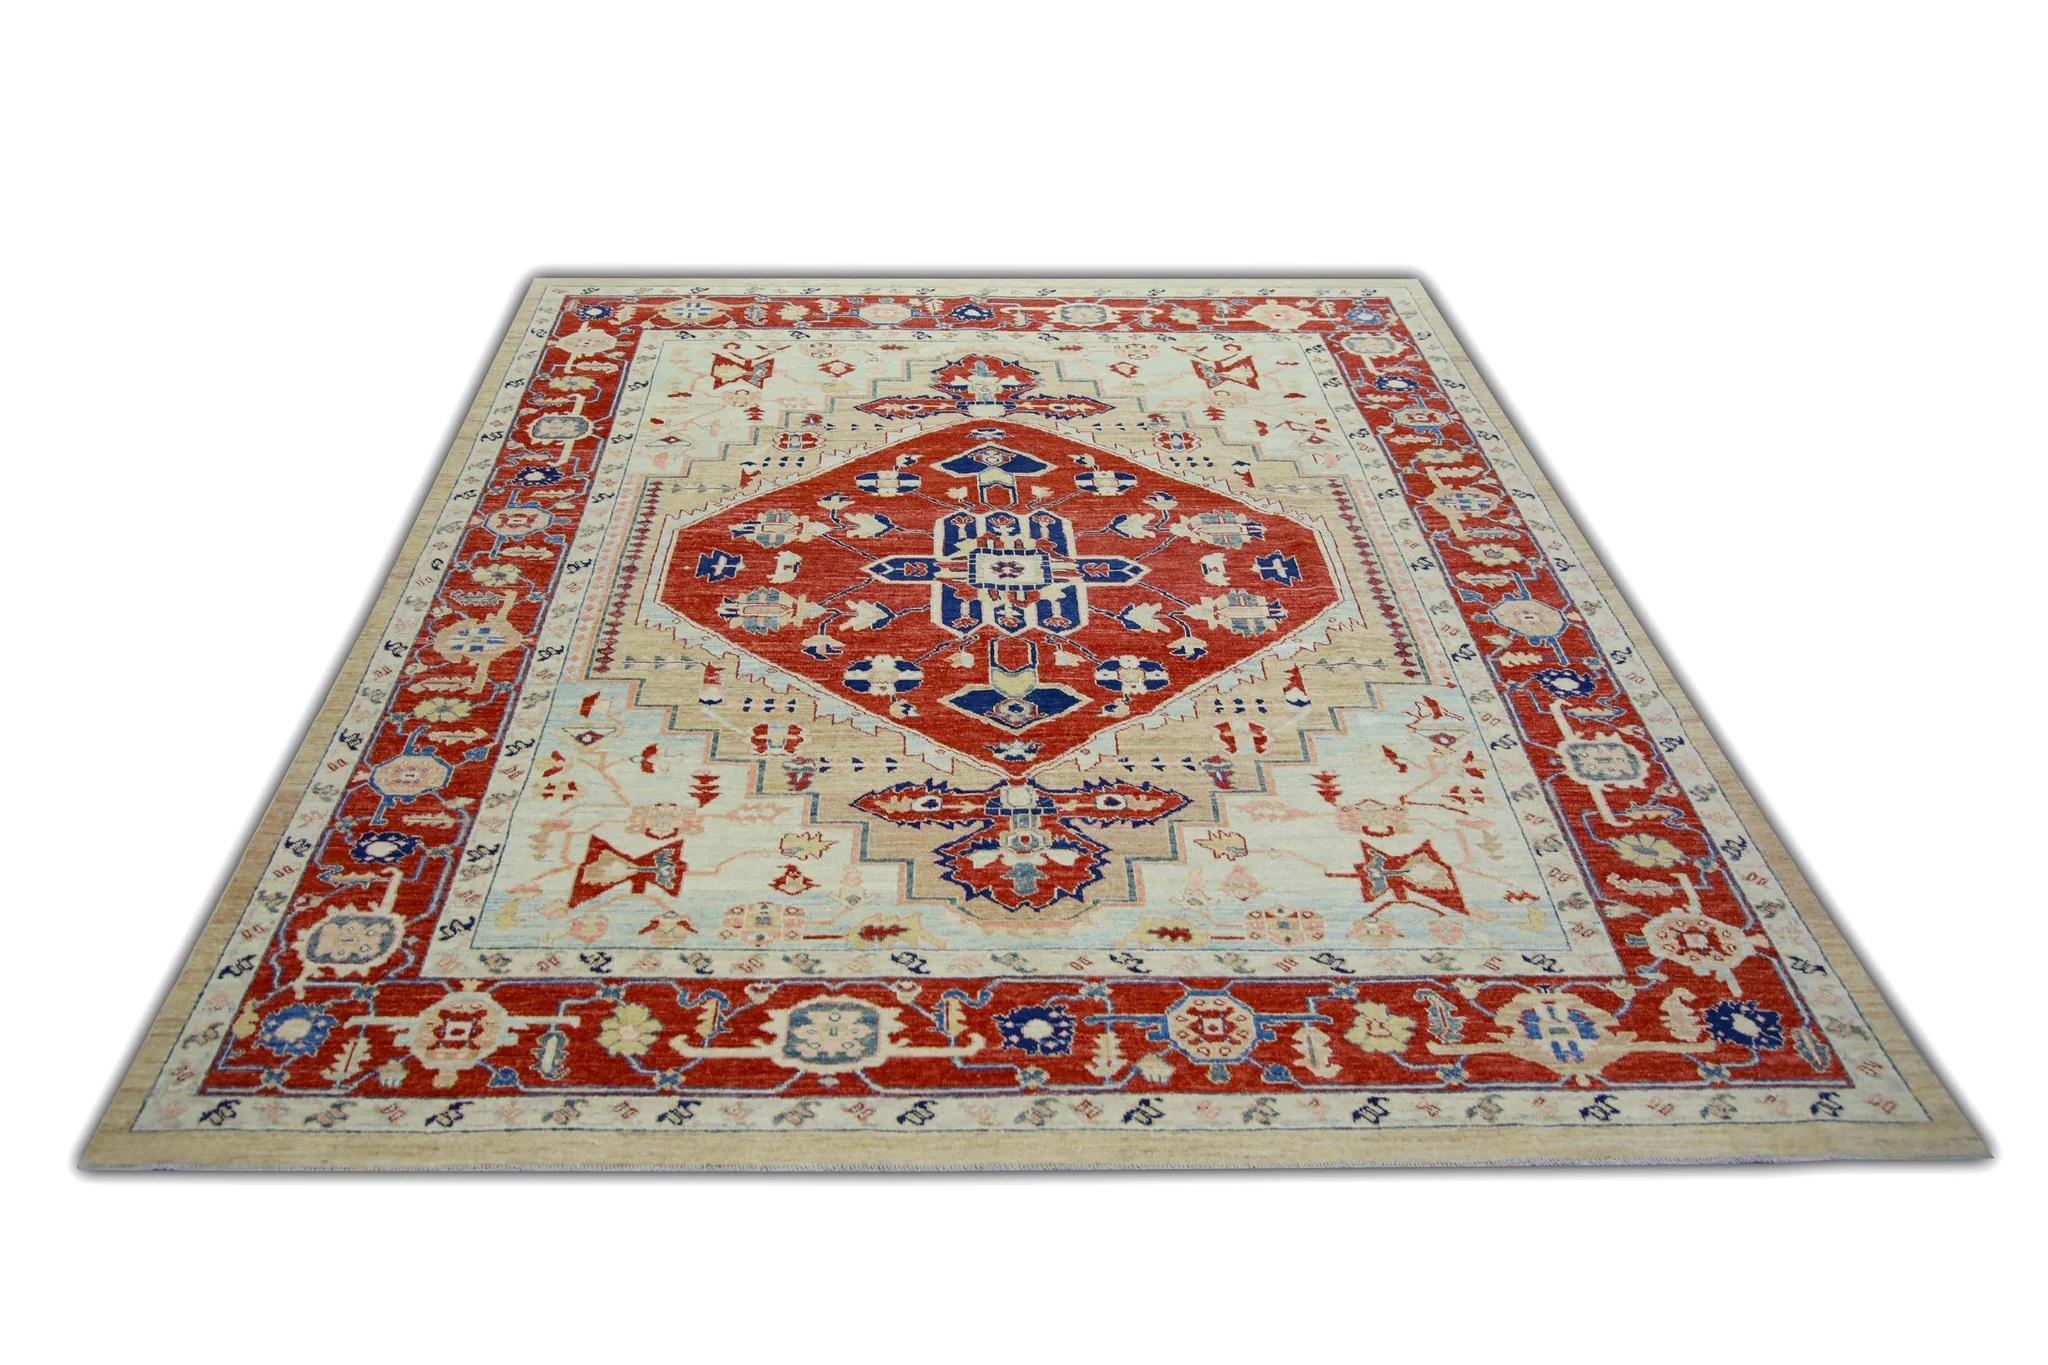 Floral Turkish Finewoven Wool Oushak Rug in Bright Red and Blue 7'10